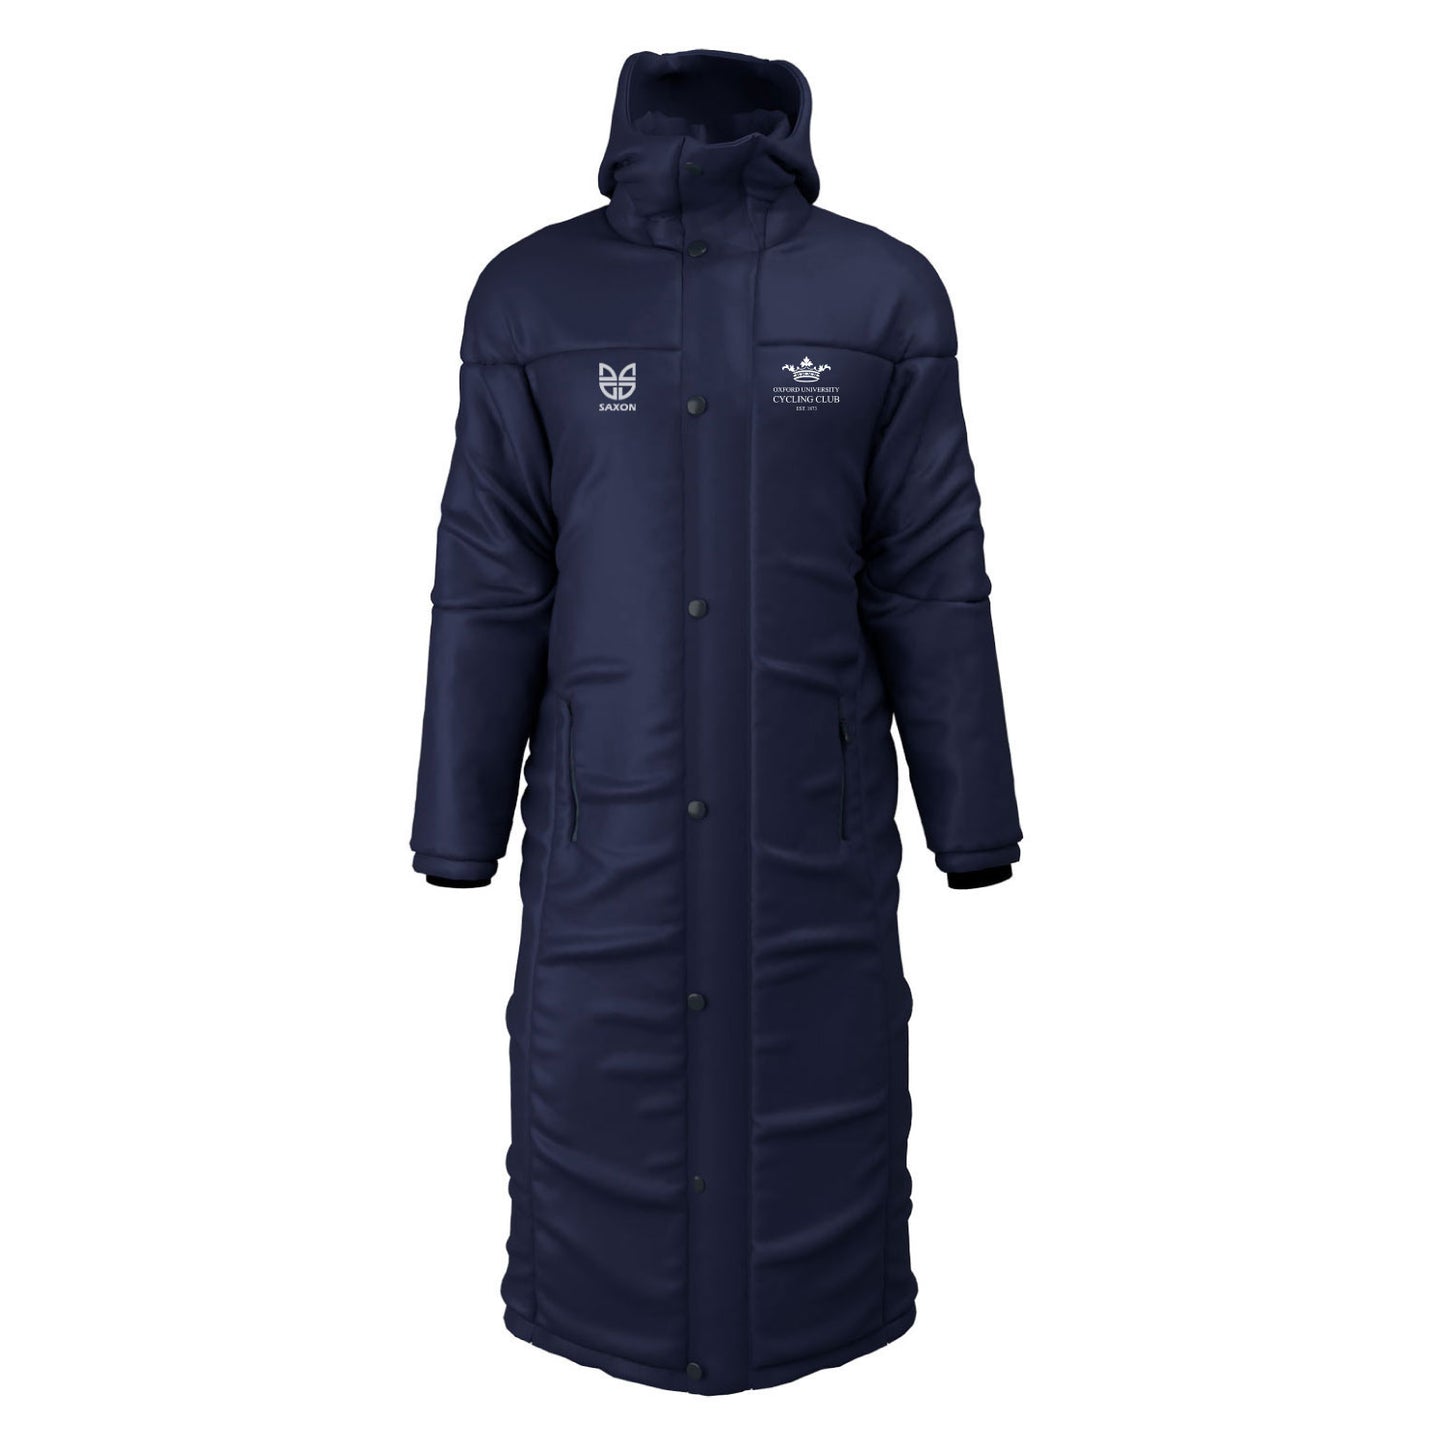 Oxford University Cycling Club Contoured Thermal Sub Coat